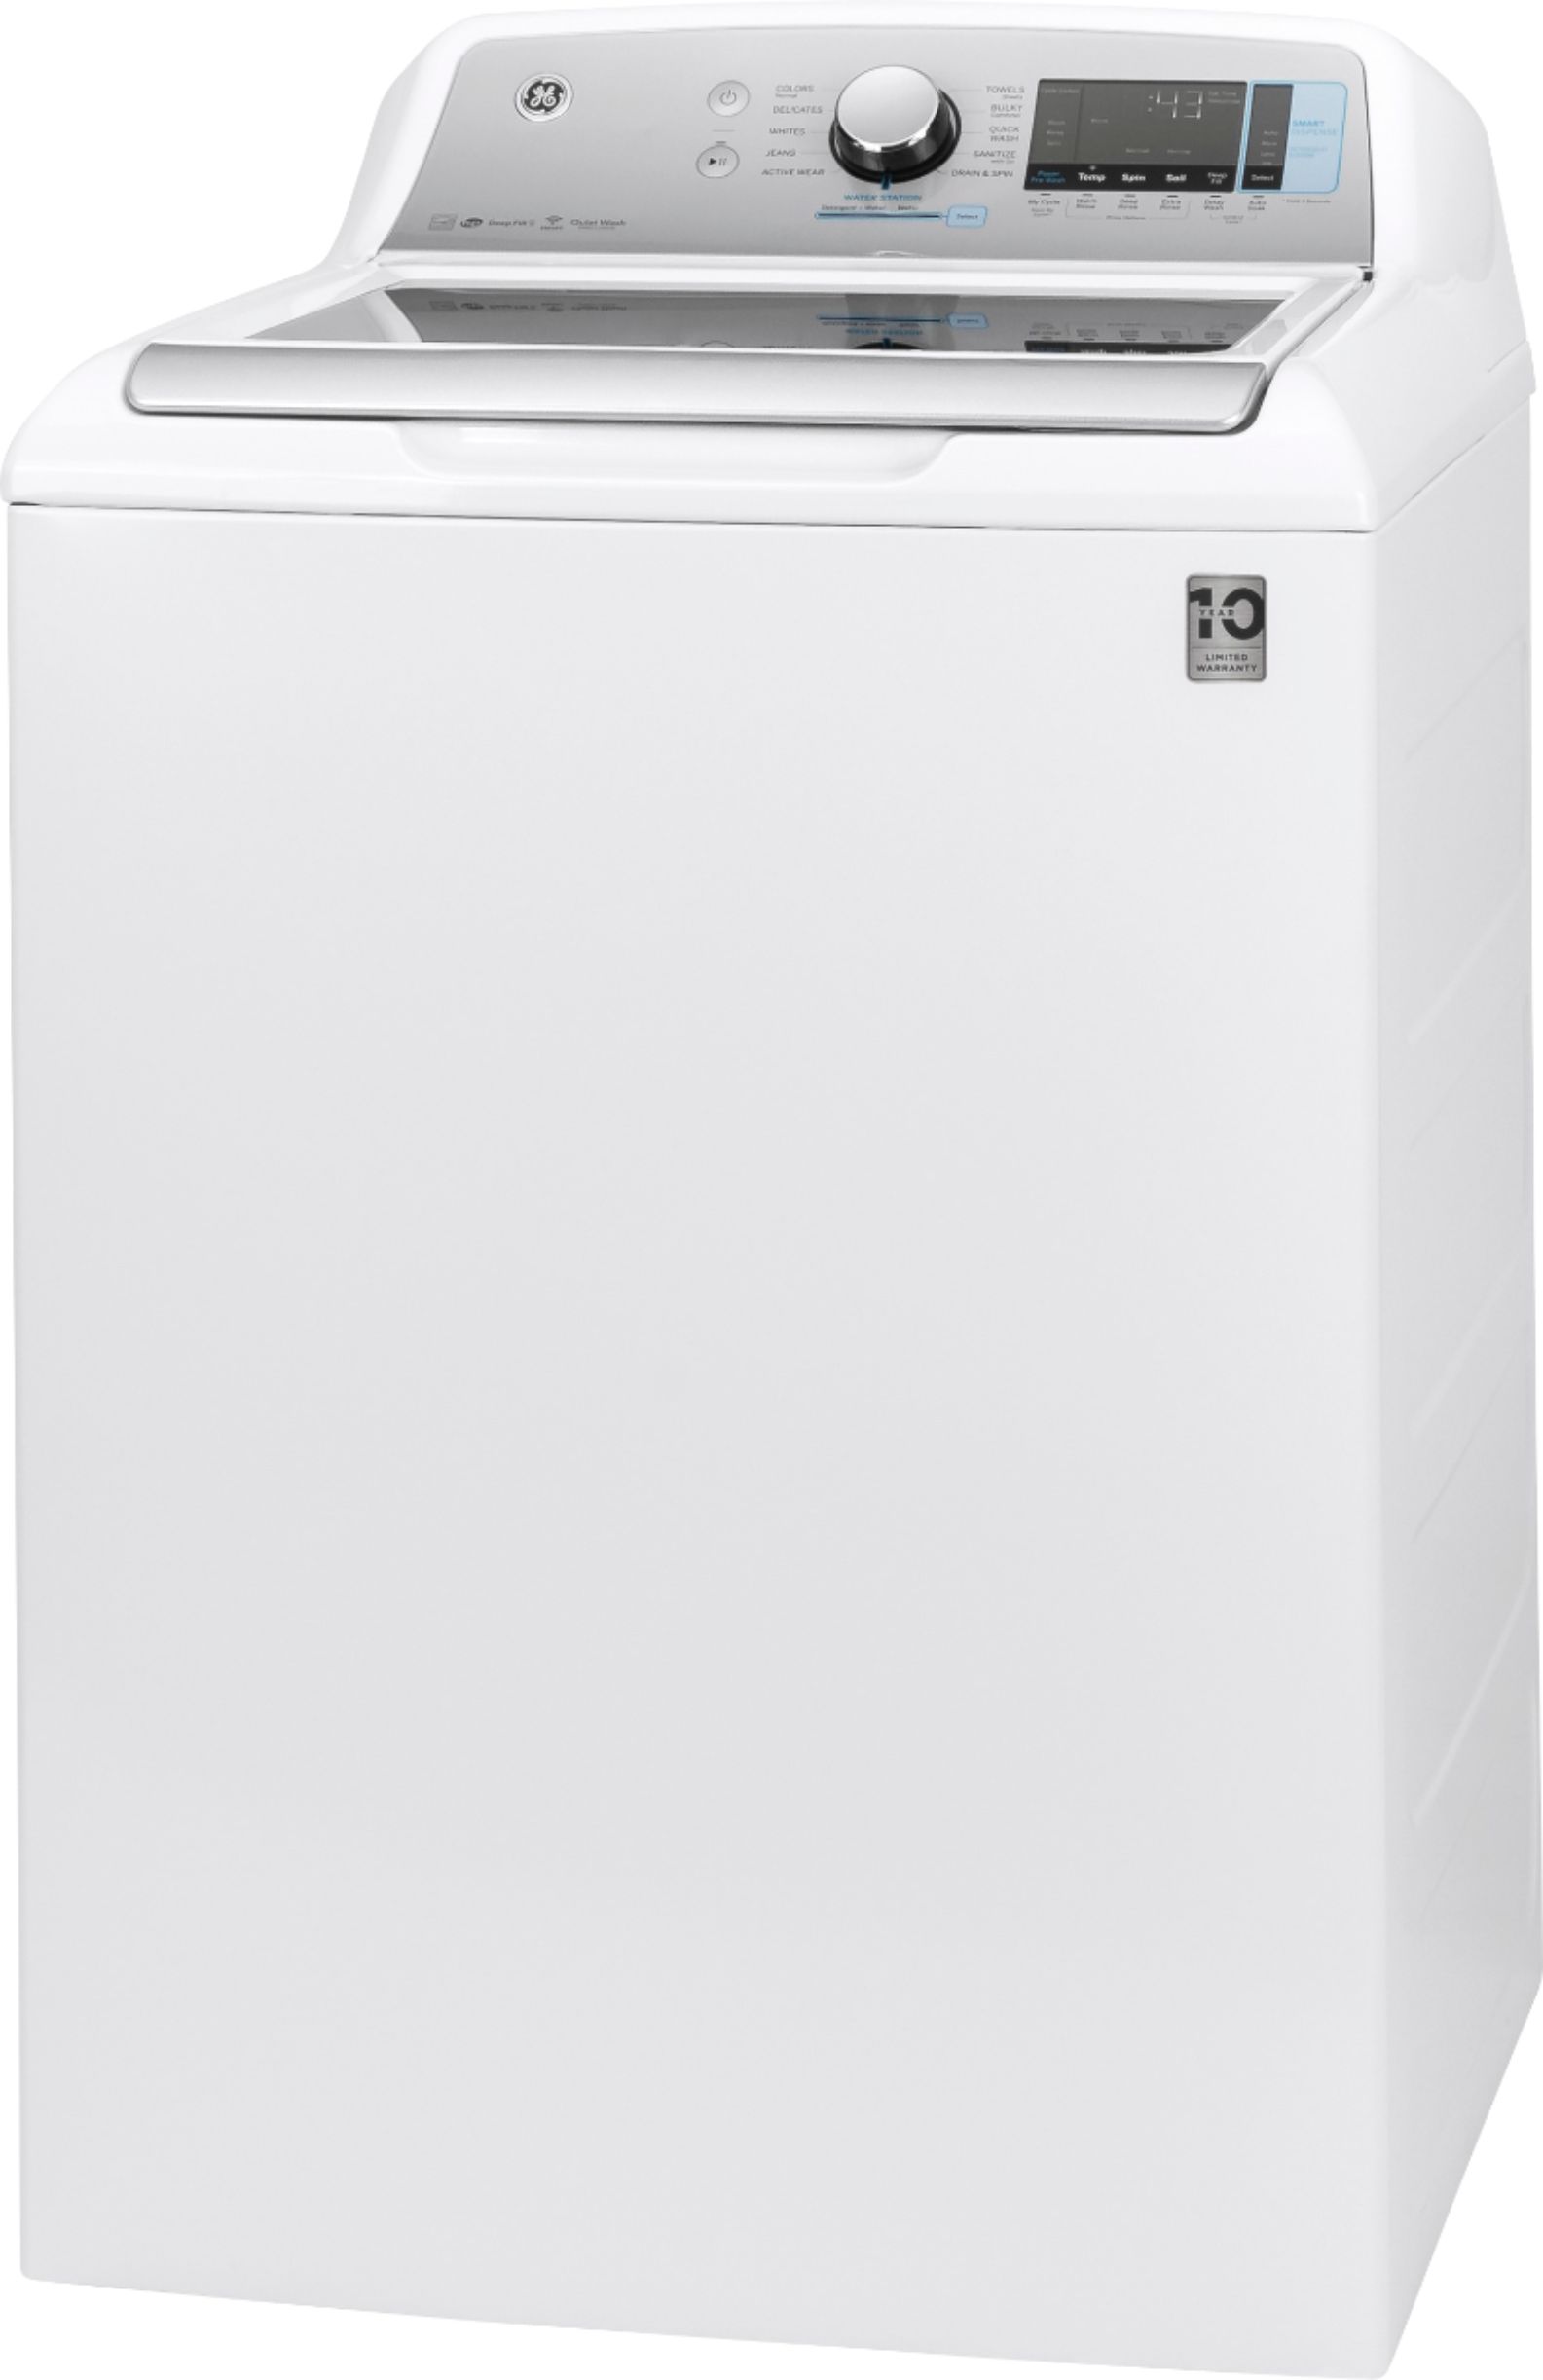 Ge 5 2 Cu Ft High Efficiency Top Load Washer White On White With Silver Backsplash Gtw840csnws Best Buy